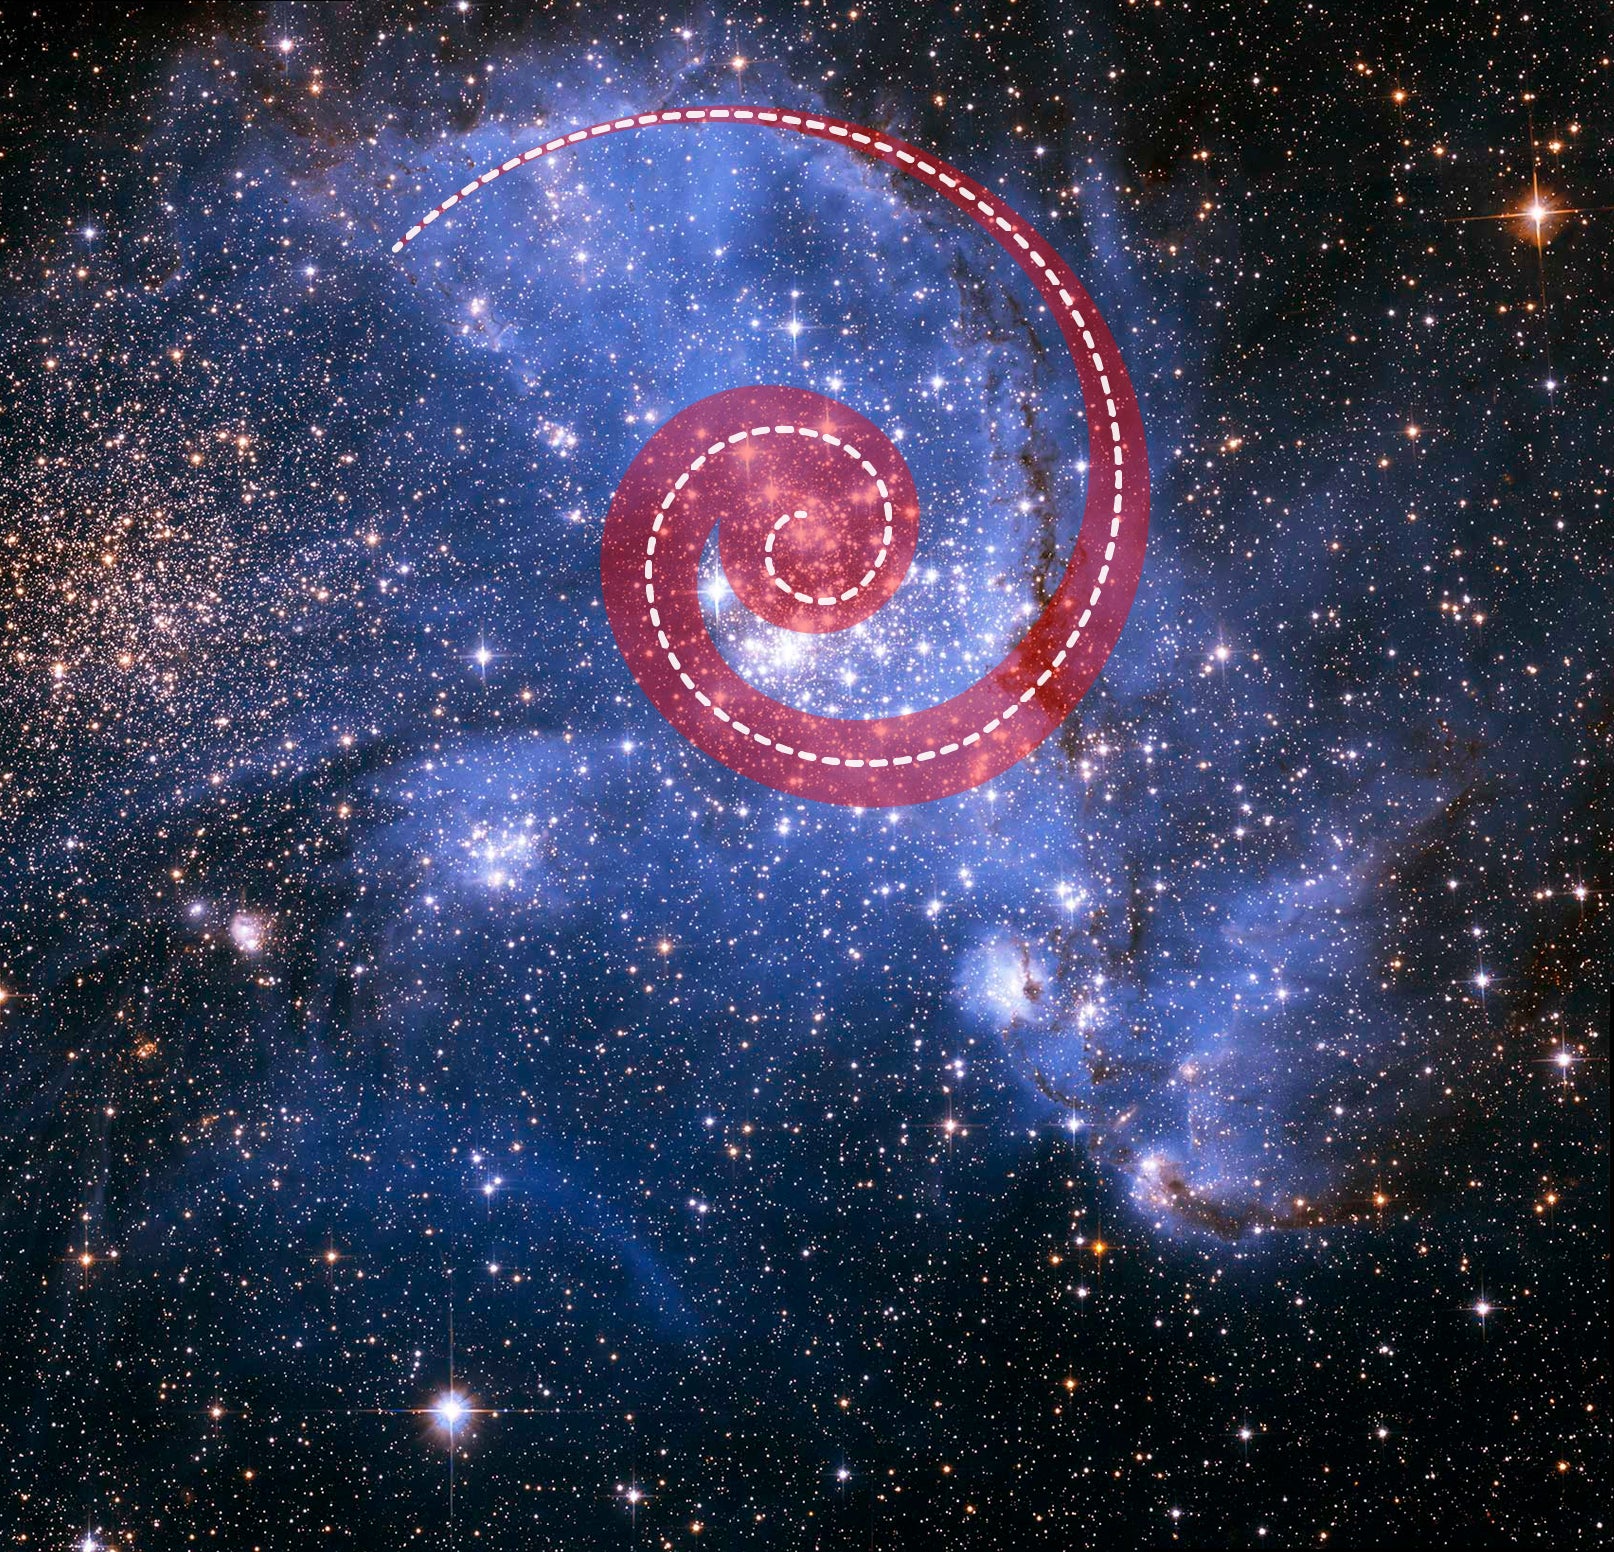 The spiral arm of the star cluster NGC 346, located in the Small Magellanic Cloud